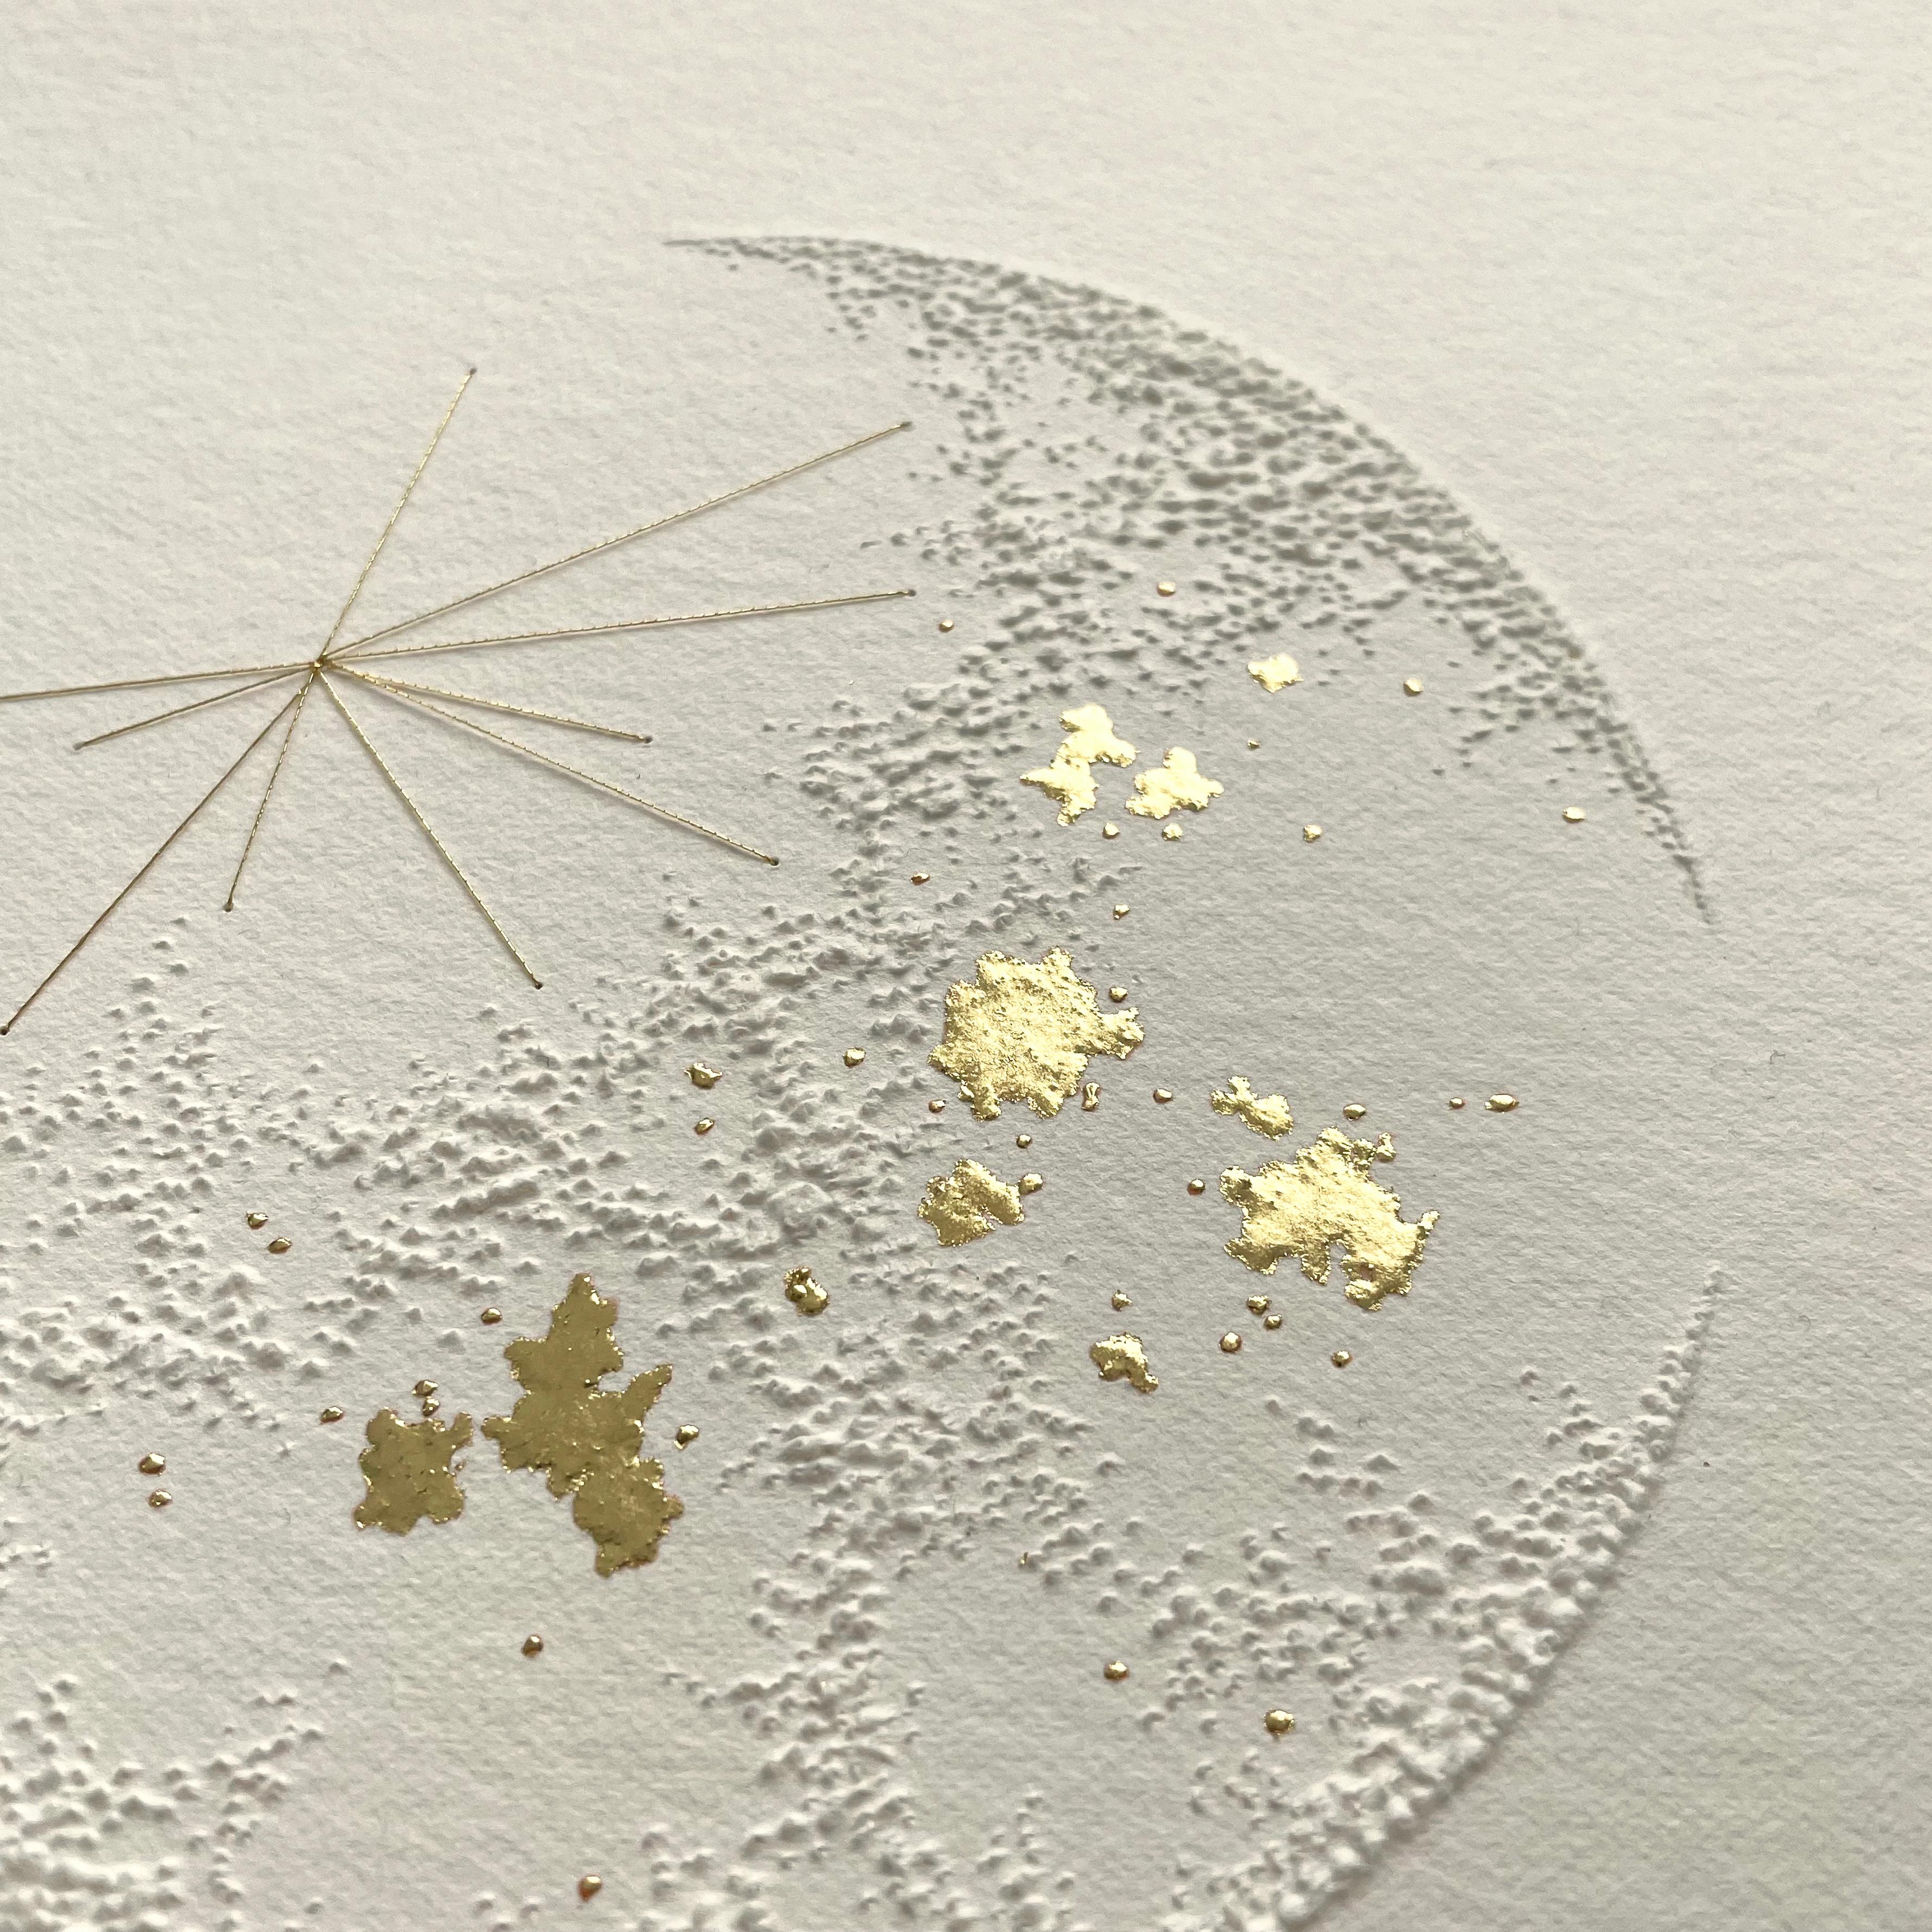 Moon 3- white 3D abstract circle with gold leaves. thread and pulled paper fiber - Gold Abstract Sculpture by Antonin Anzil